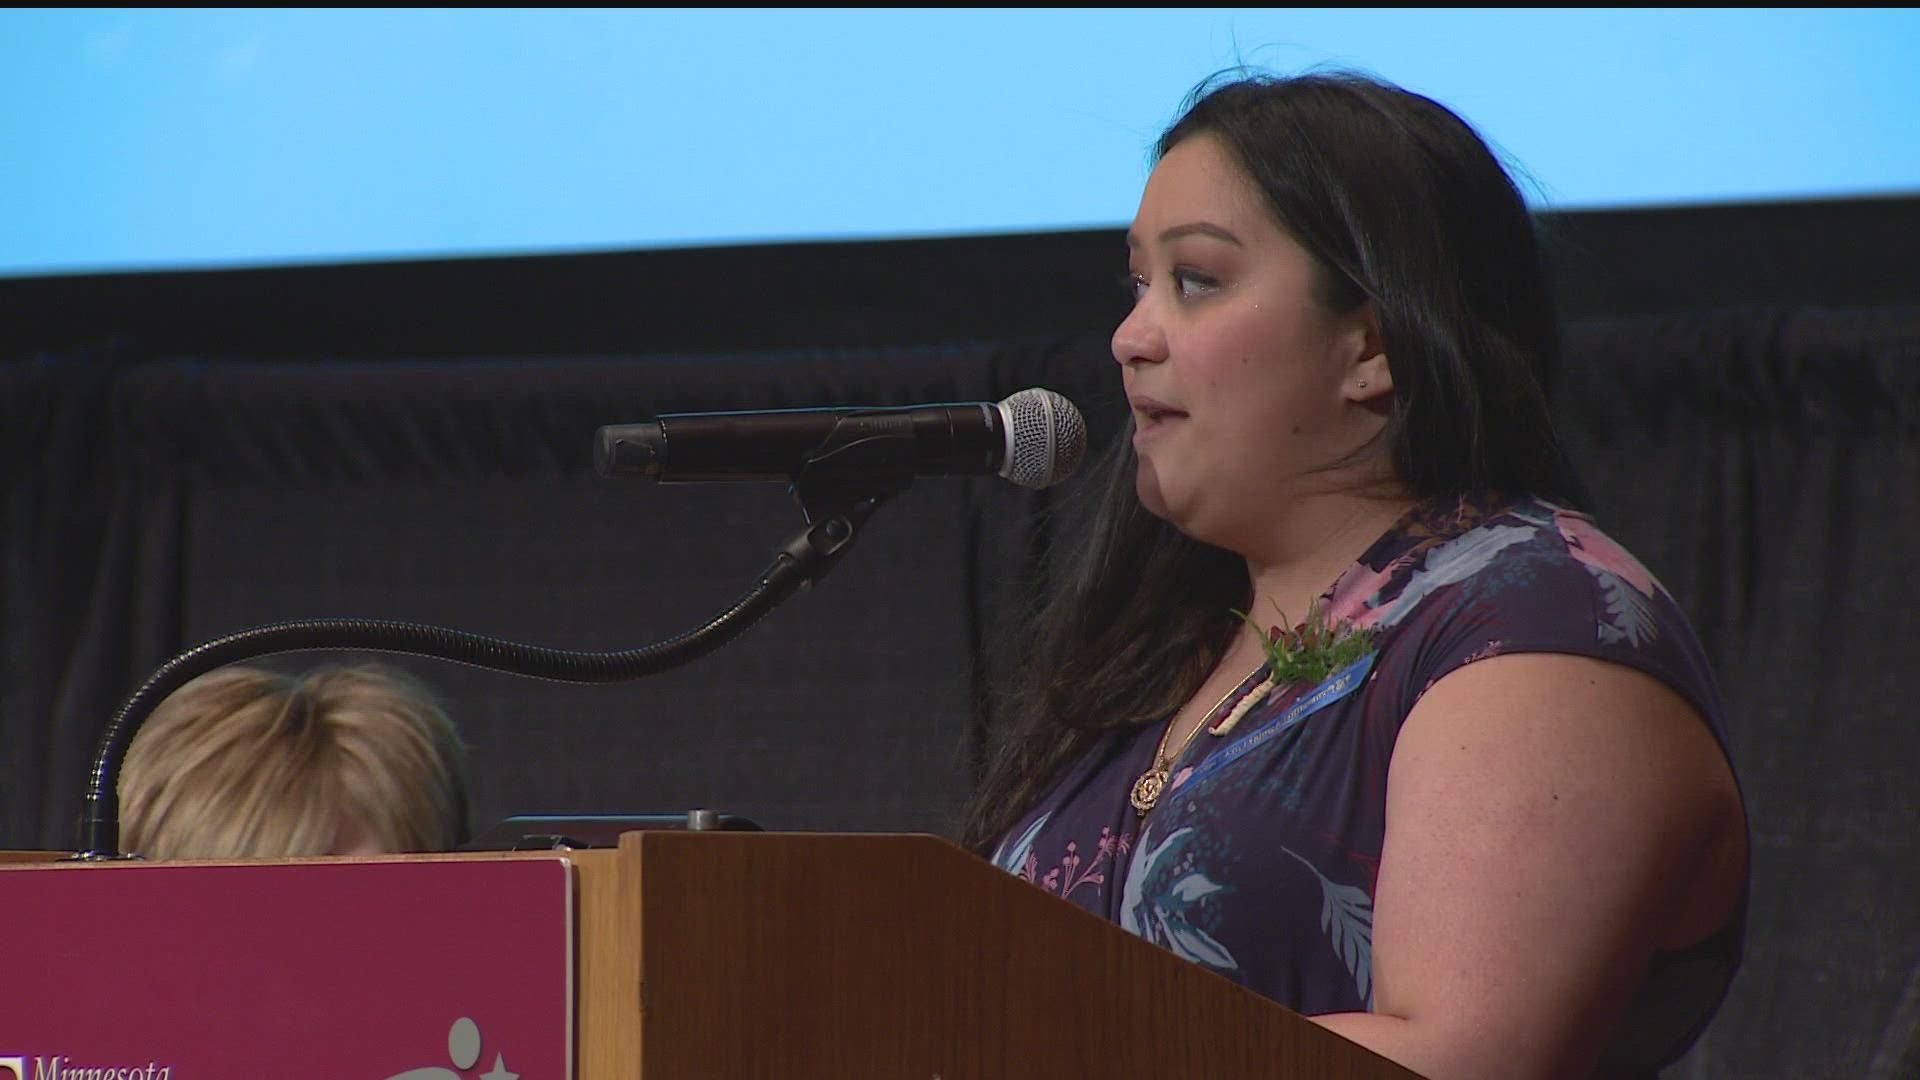 Sarah Lancaster is the first teacher of Asian/Pacific Islander Heritage to win the award, and the first in nearly 40 years to come from such a small Minnesota town.